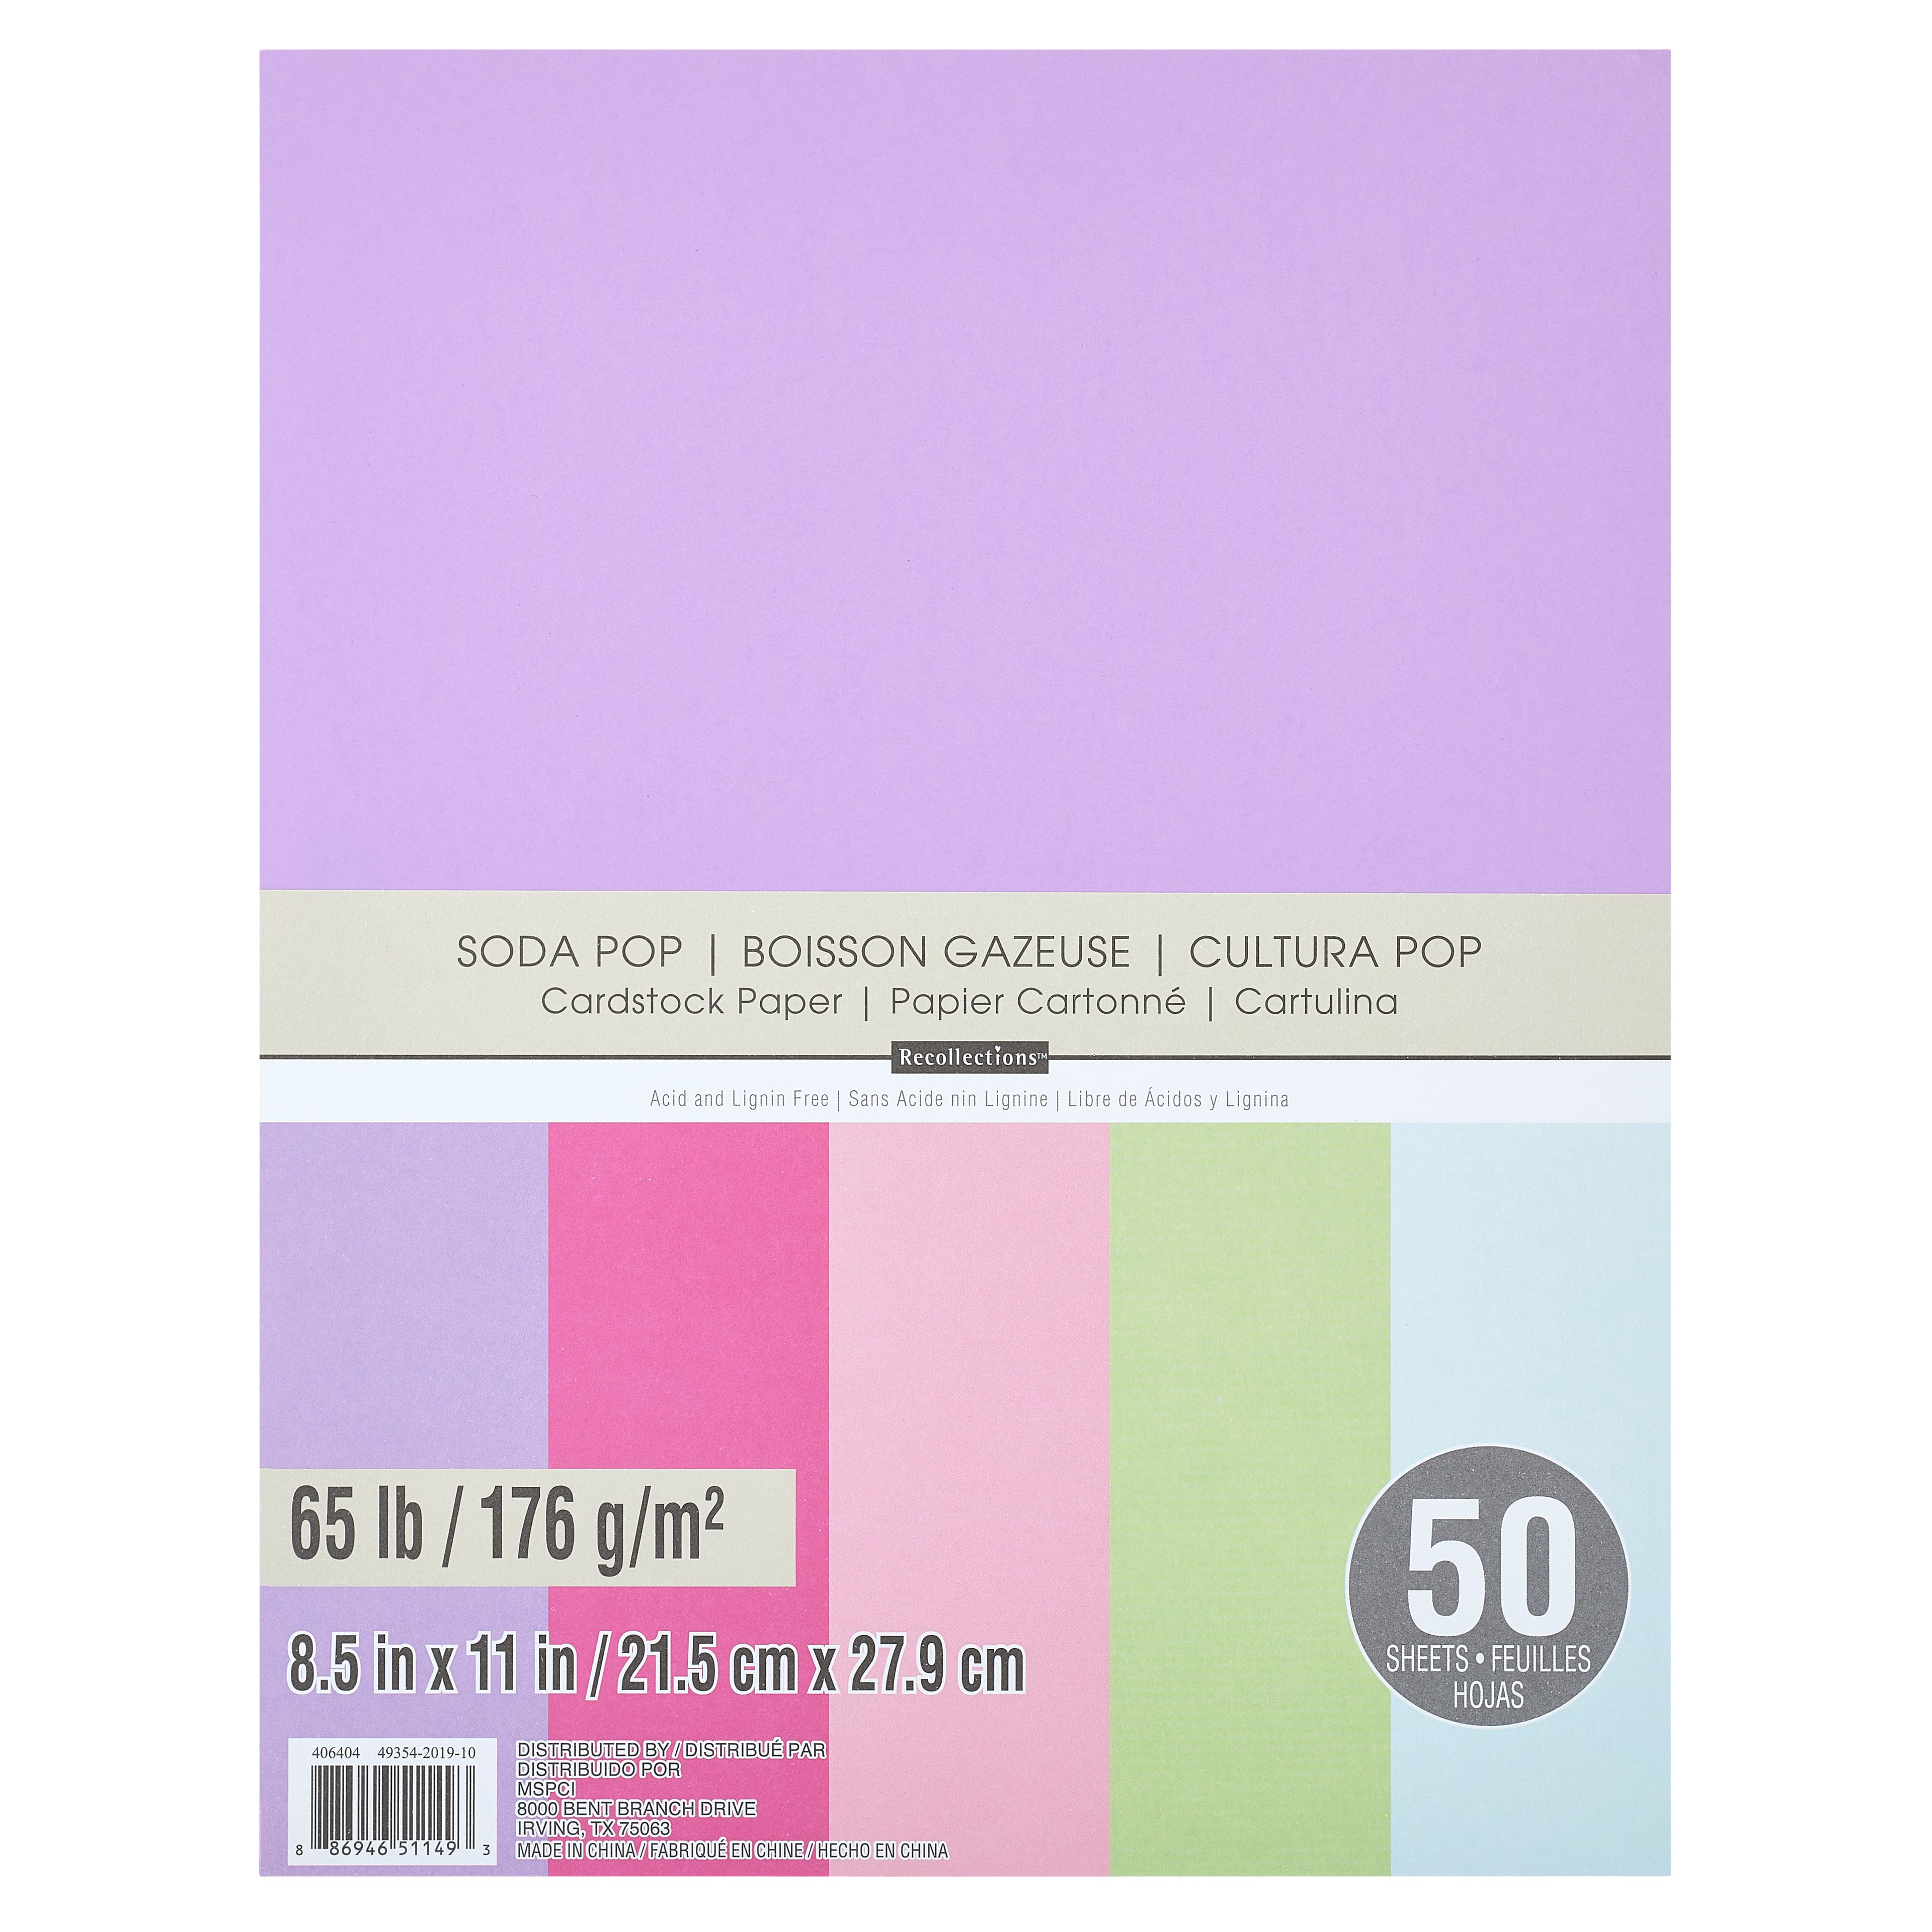 12 Packs: 25 ct. (300 total) Gold Foil 8.5 x 11 Cardstock Paper by  Recollections™